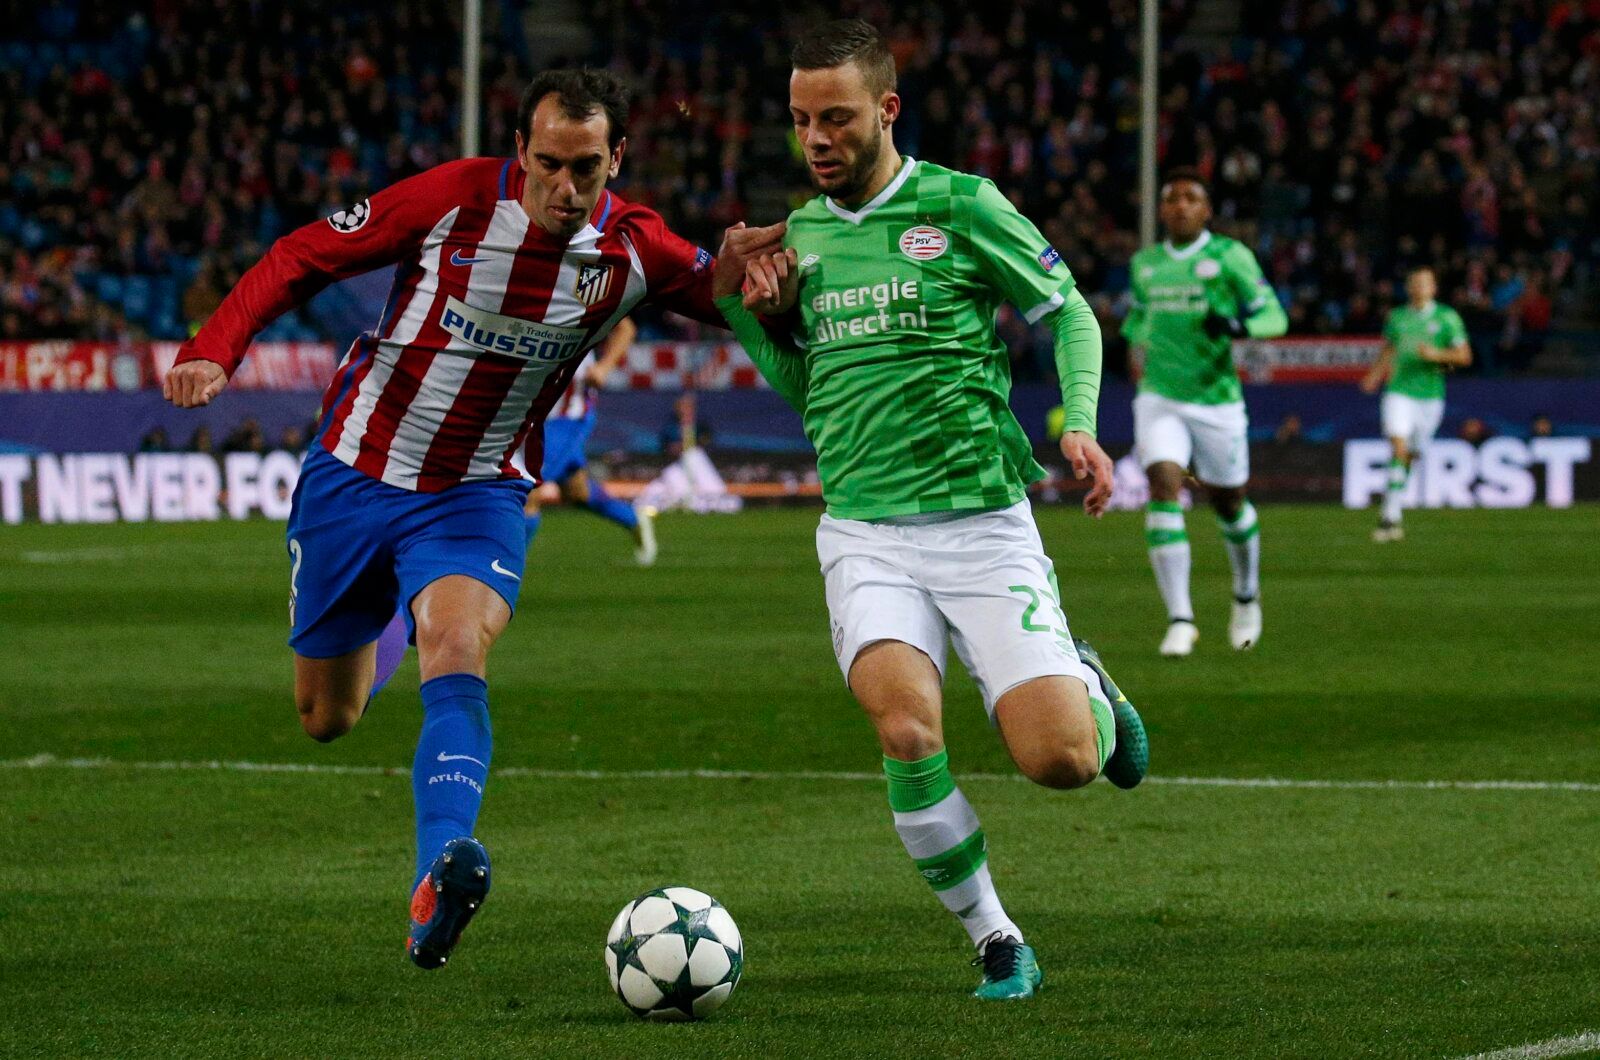 Football Soccer - Atletico Madrid v PSV Eindhoven - UEFA Champions League group stage - Group D  - Vicente Calderon stadium, Madrid, Spain - 23/11/16 Atletico Madrid's Diego Godin and PSV Eindhoven?s Bart Ramselaar in action.     REUTERS/Juan Medina